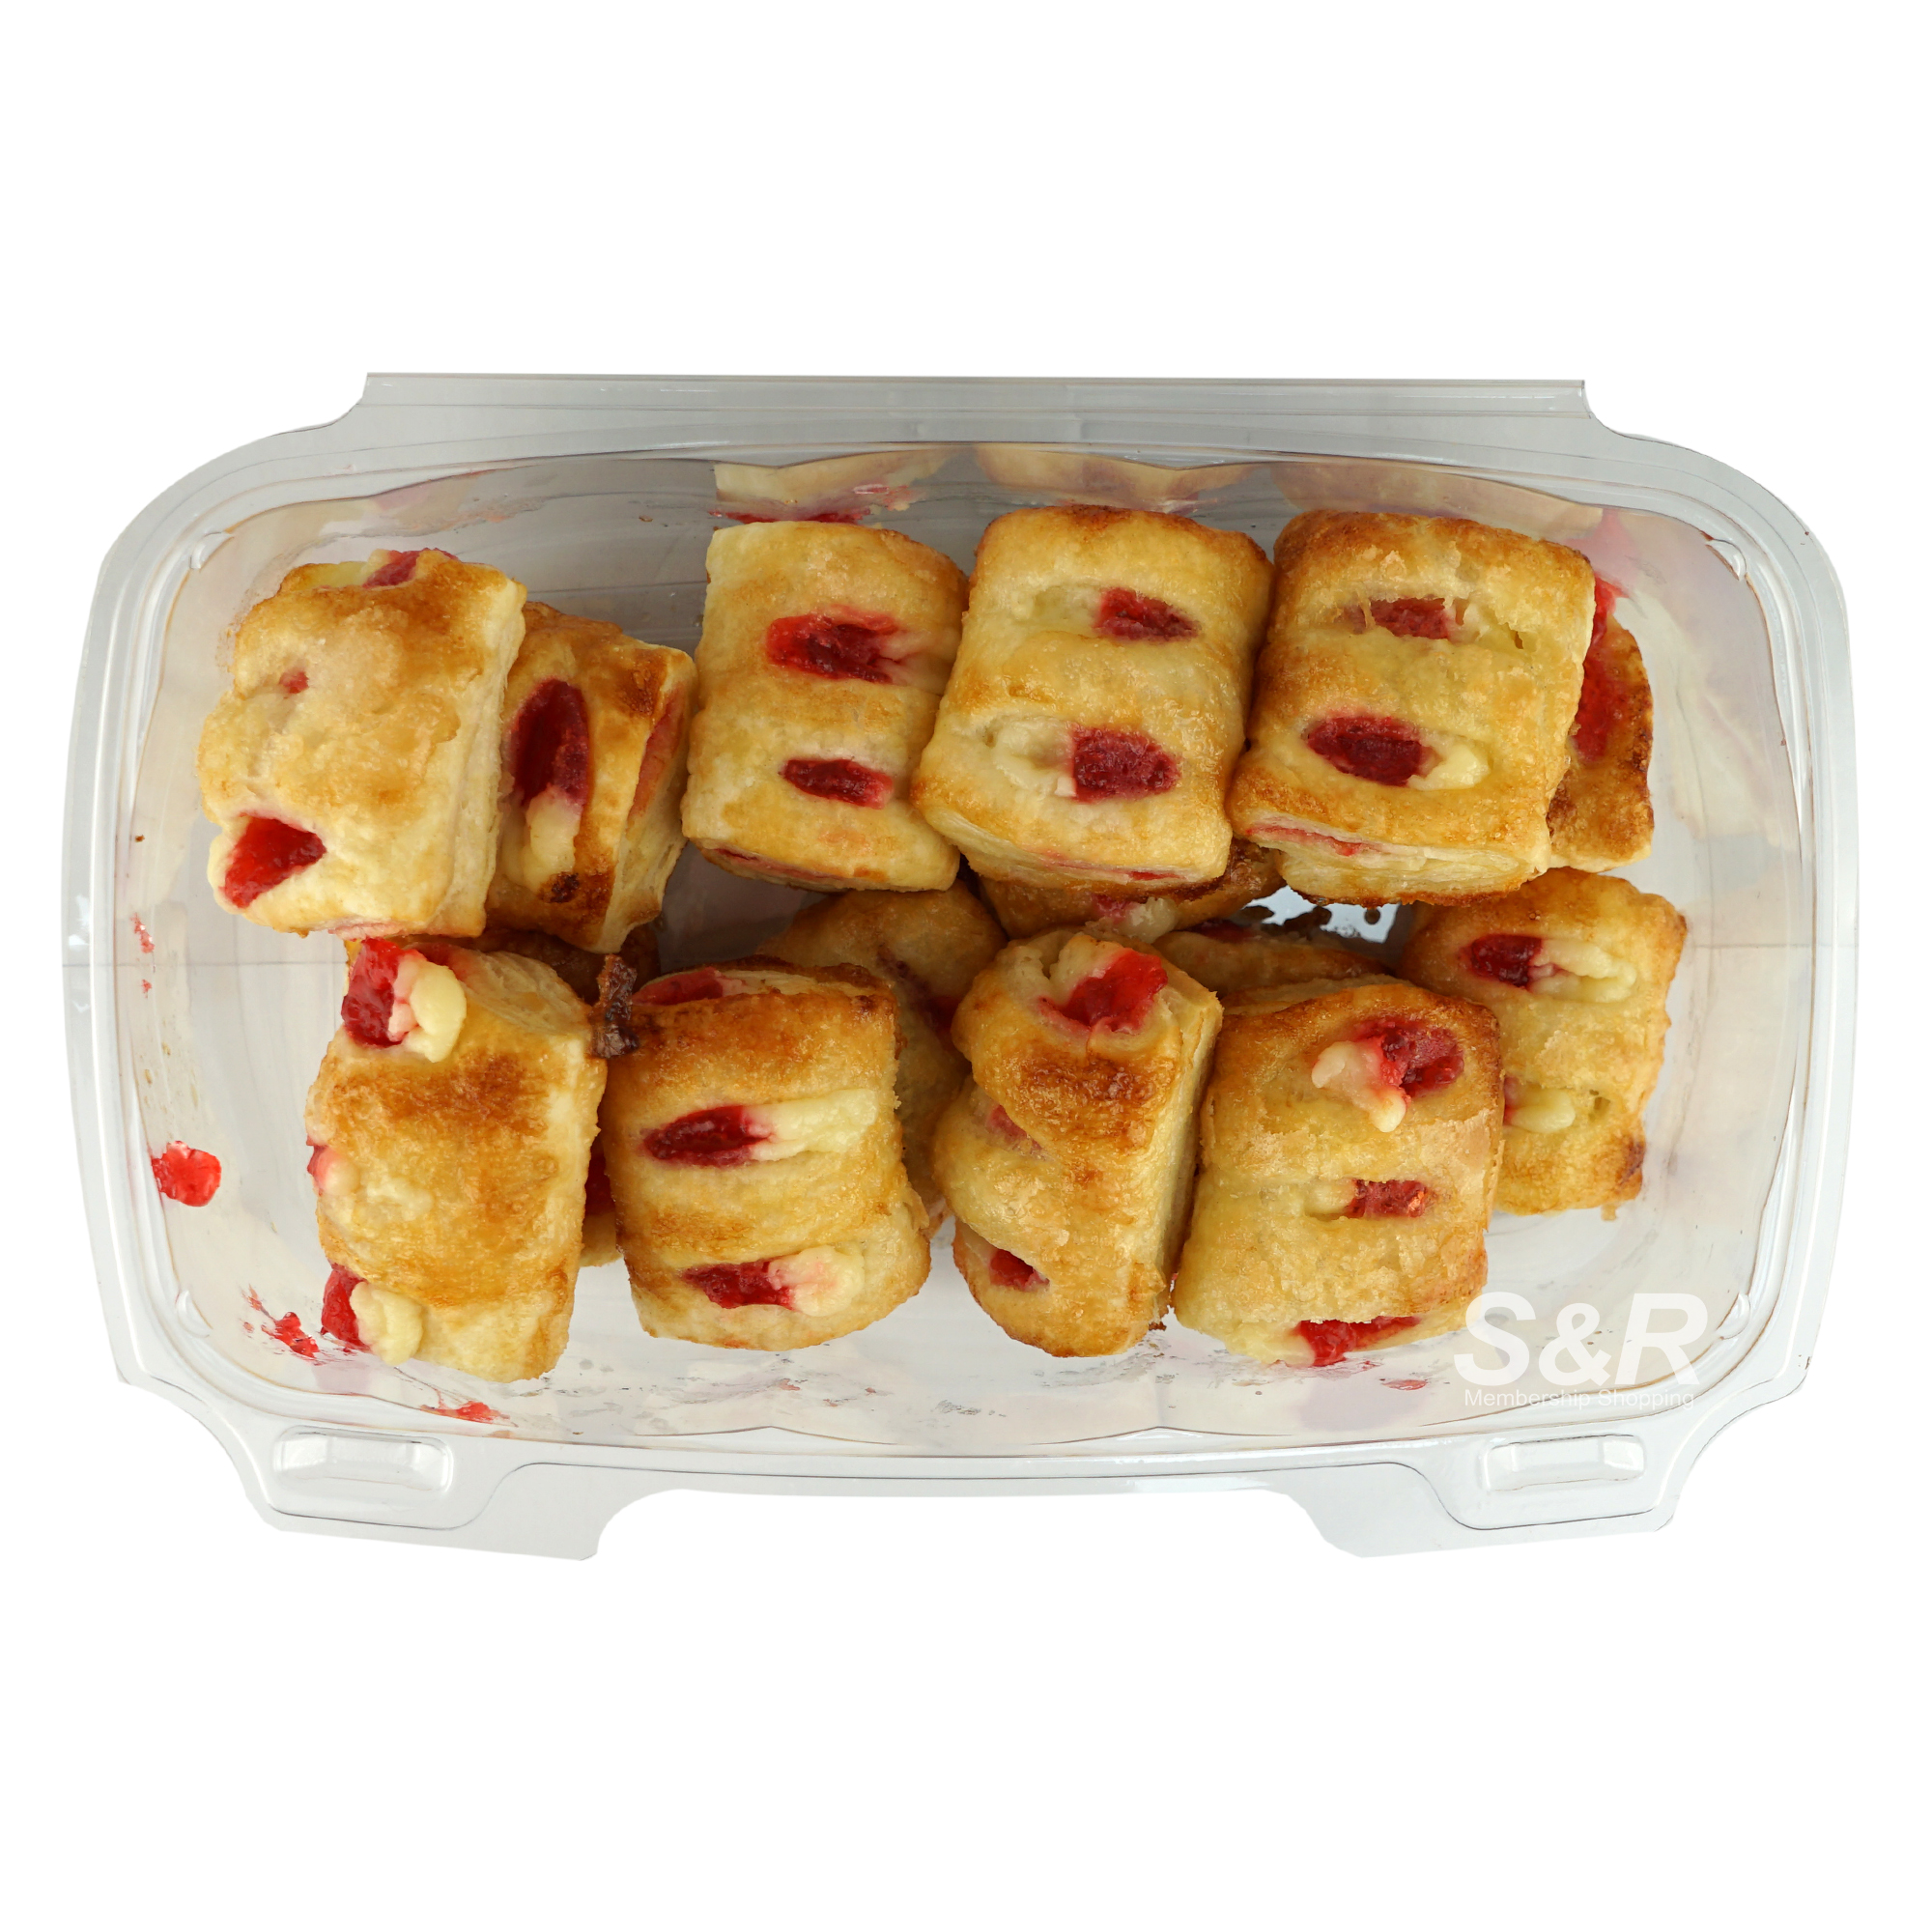 Strawberry/Cheese Strudels